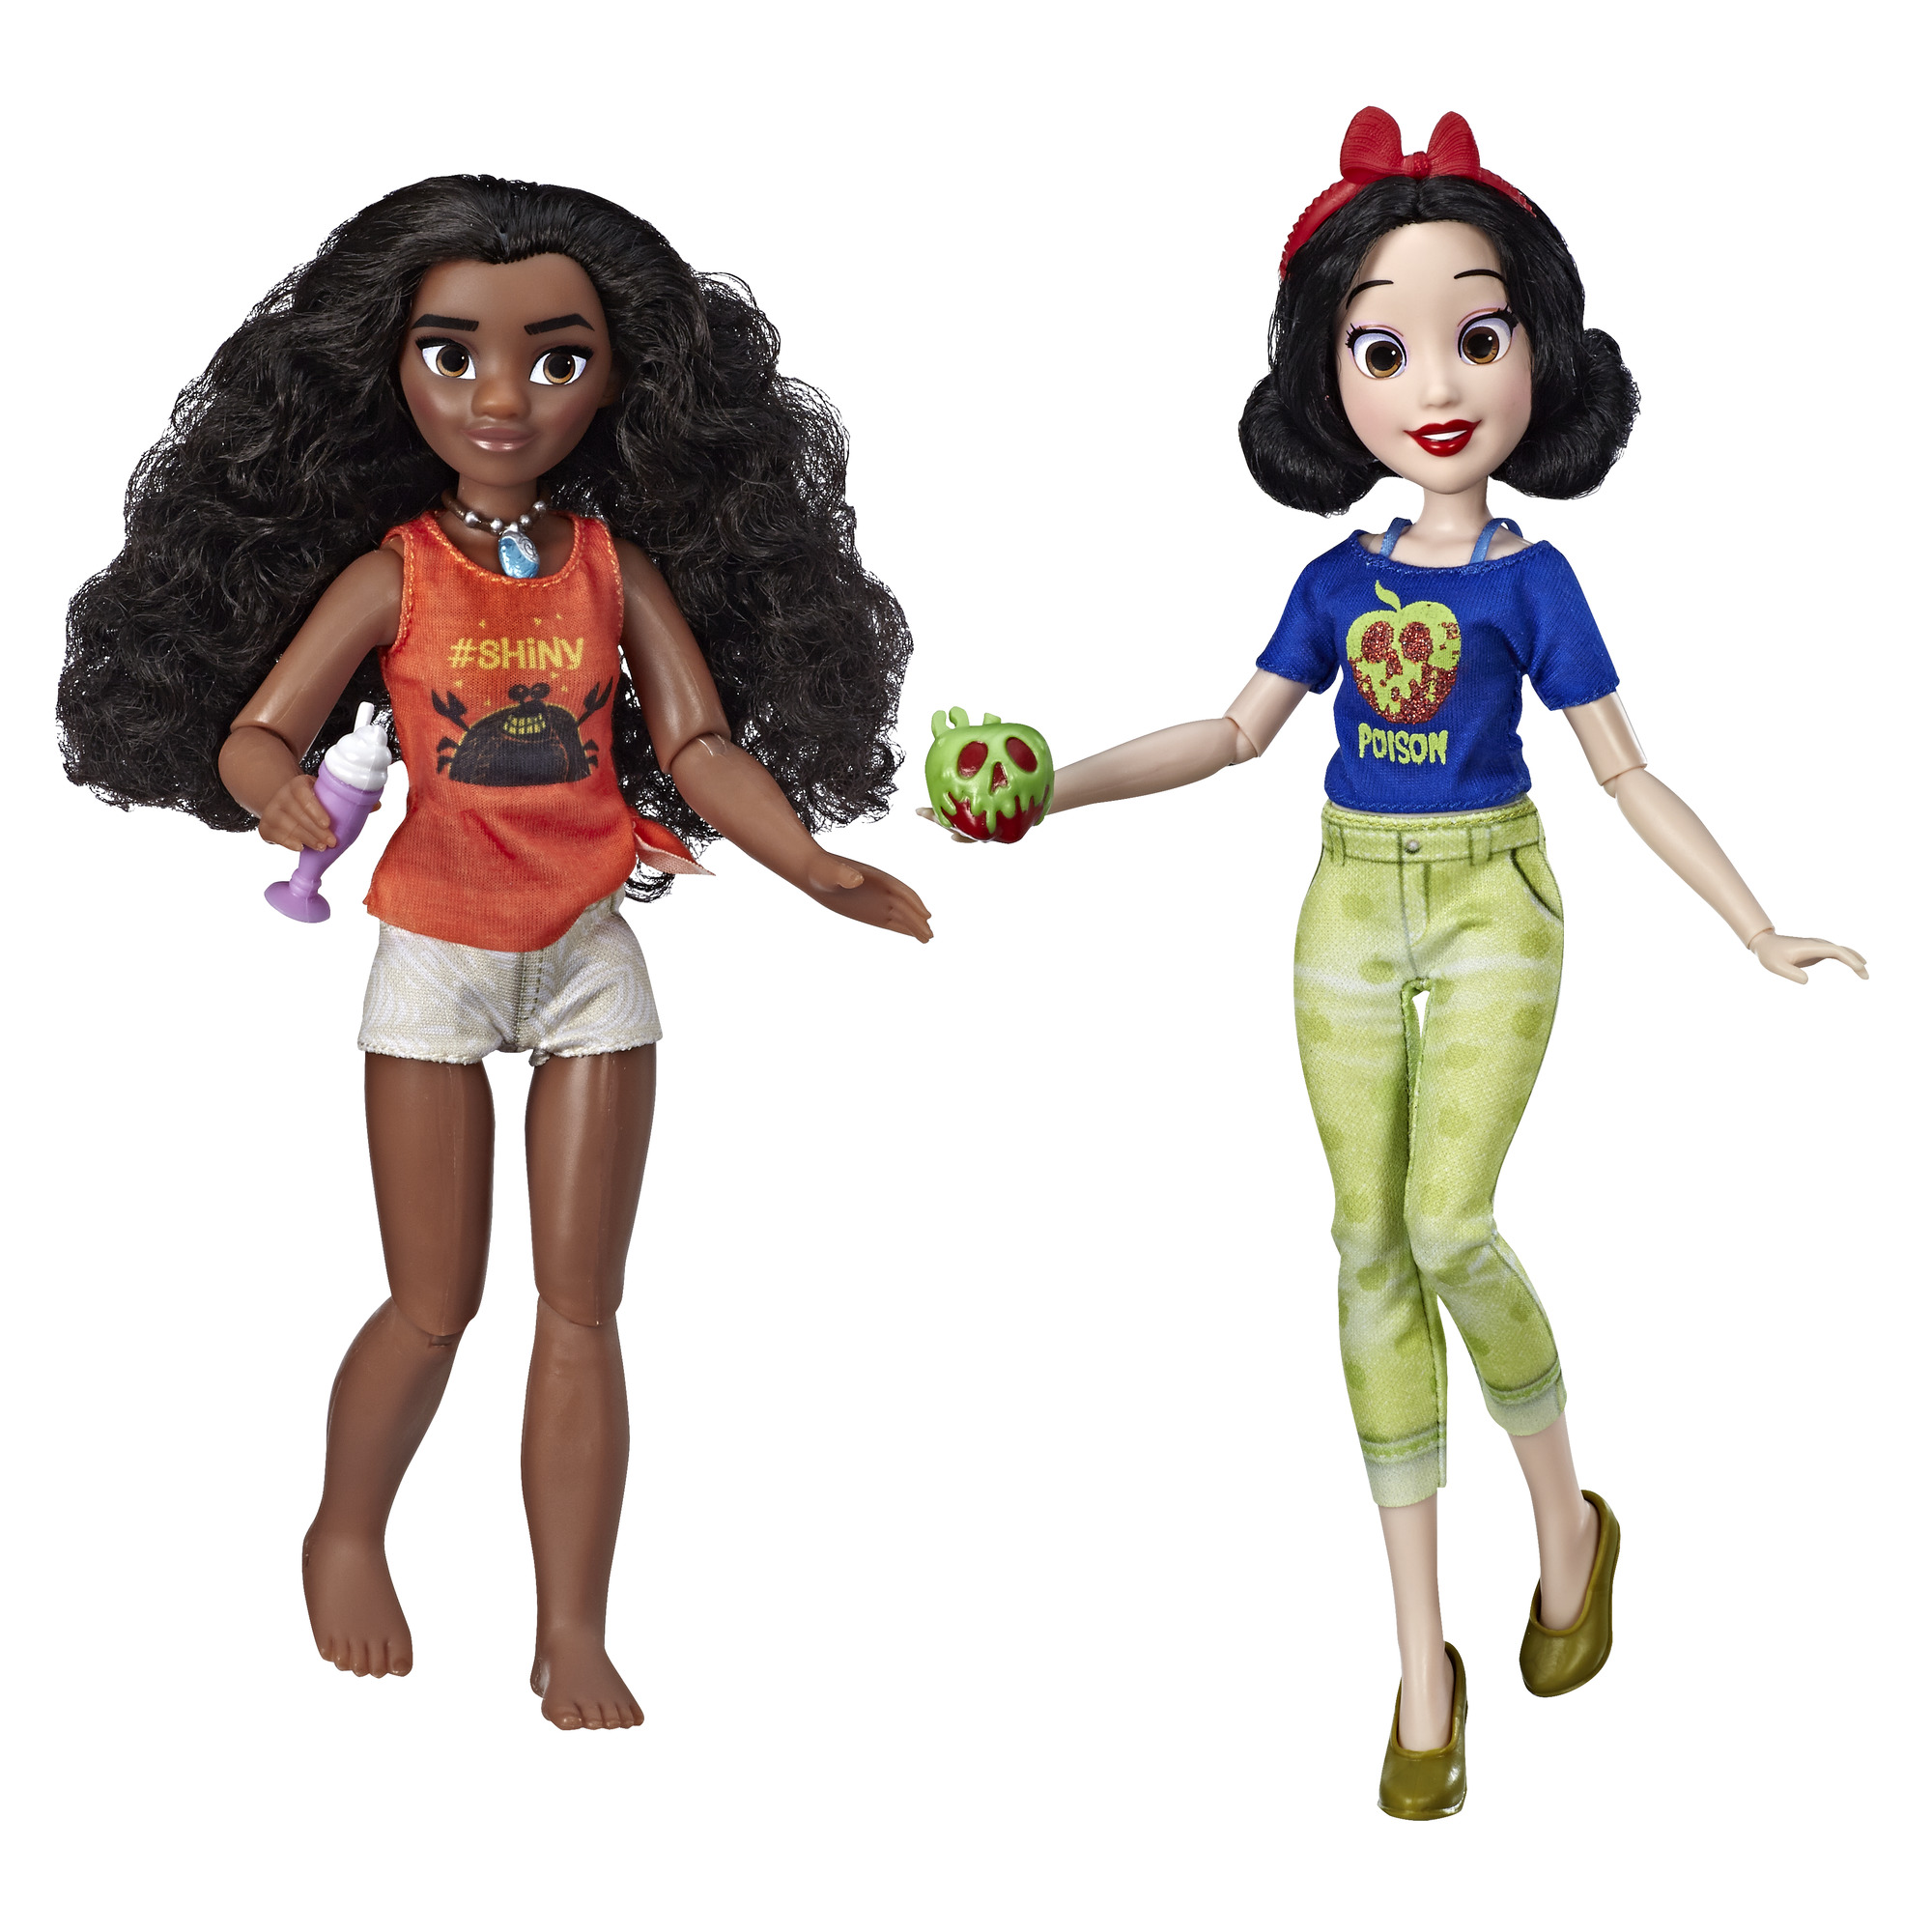 syndroom Bezwaar reservering Disney Princess Ralph Breaks the Internet Movie Dolls, Moana and Snow White  Dolls with Comfy Clothes and Accessories